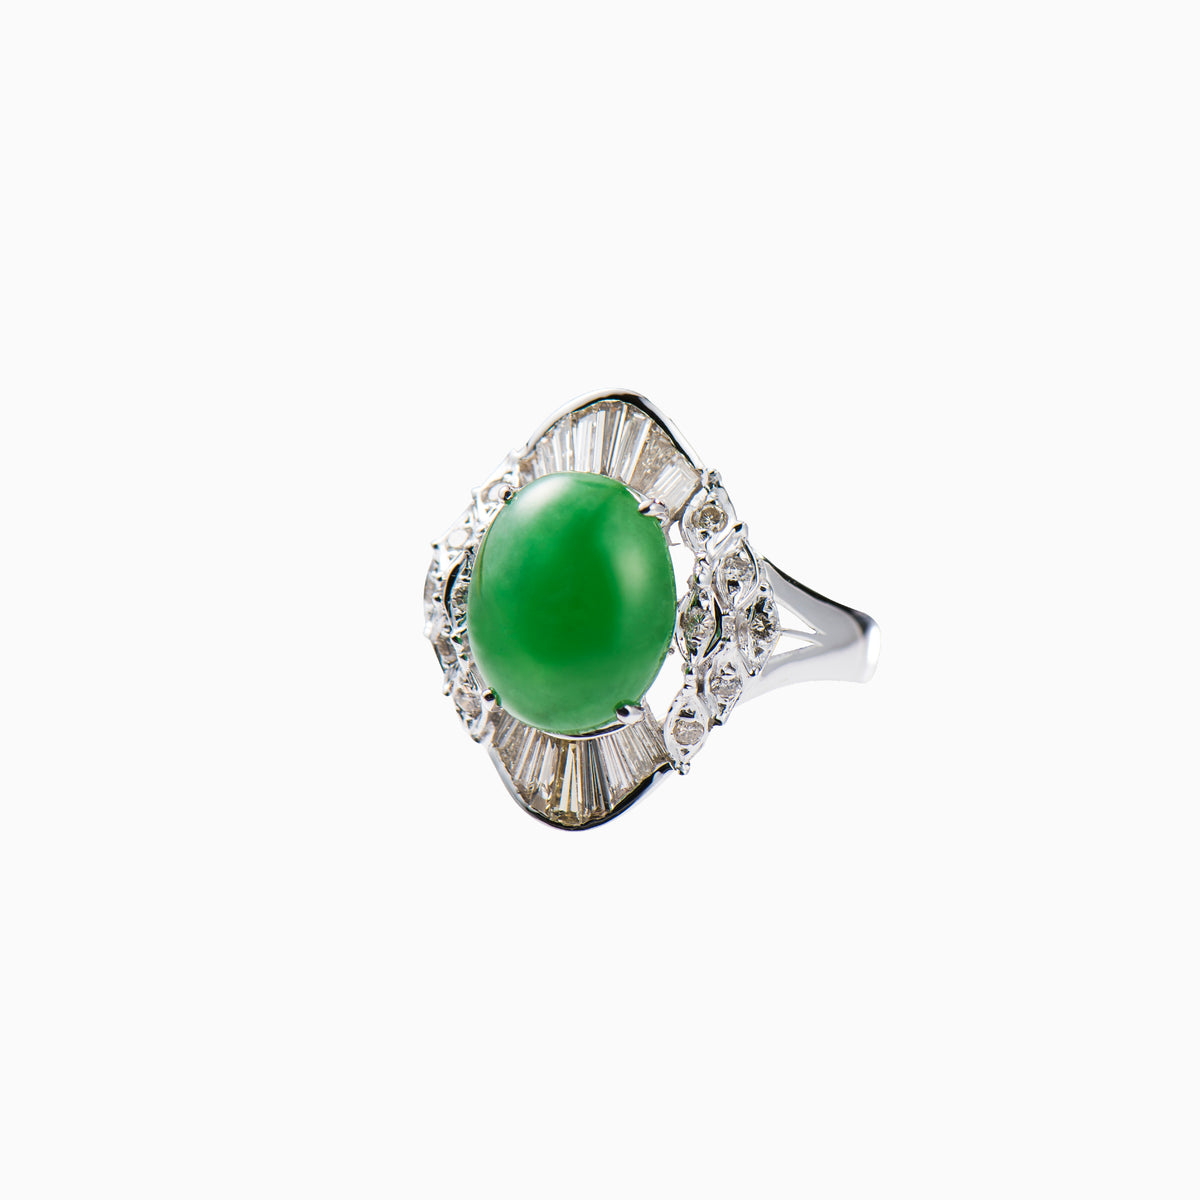 Green jade ring framed by a crown of Baguette Diamonds